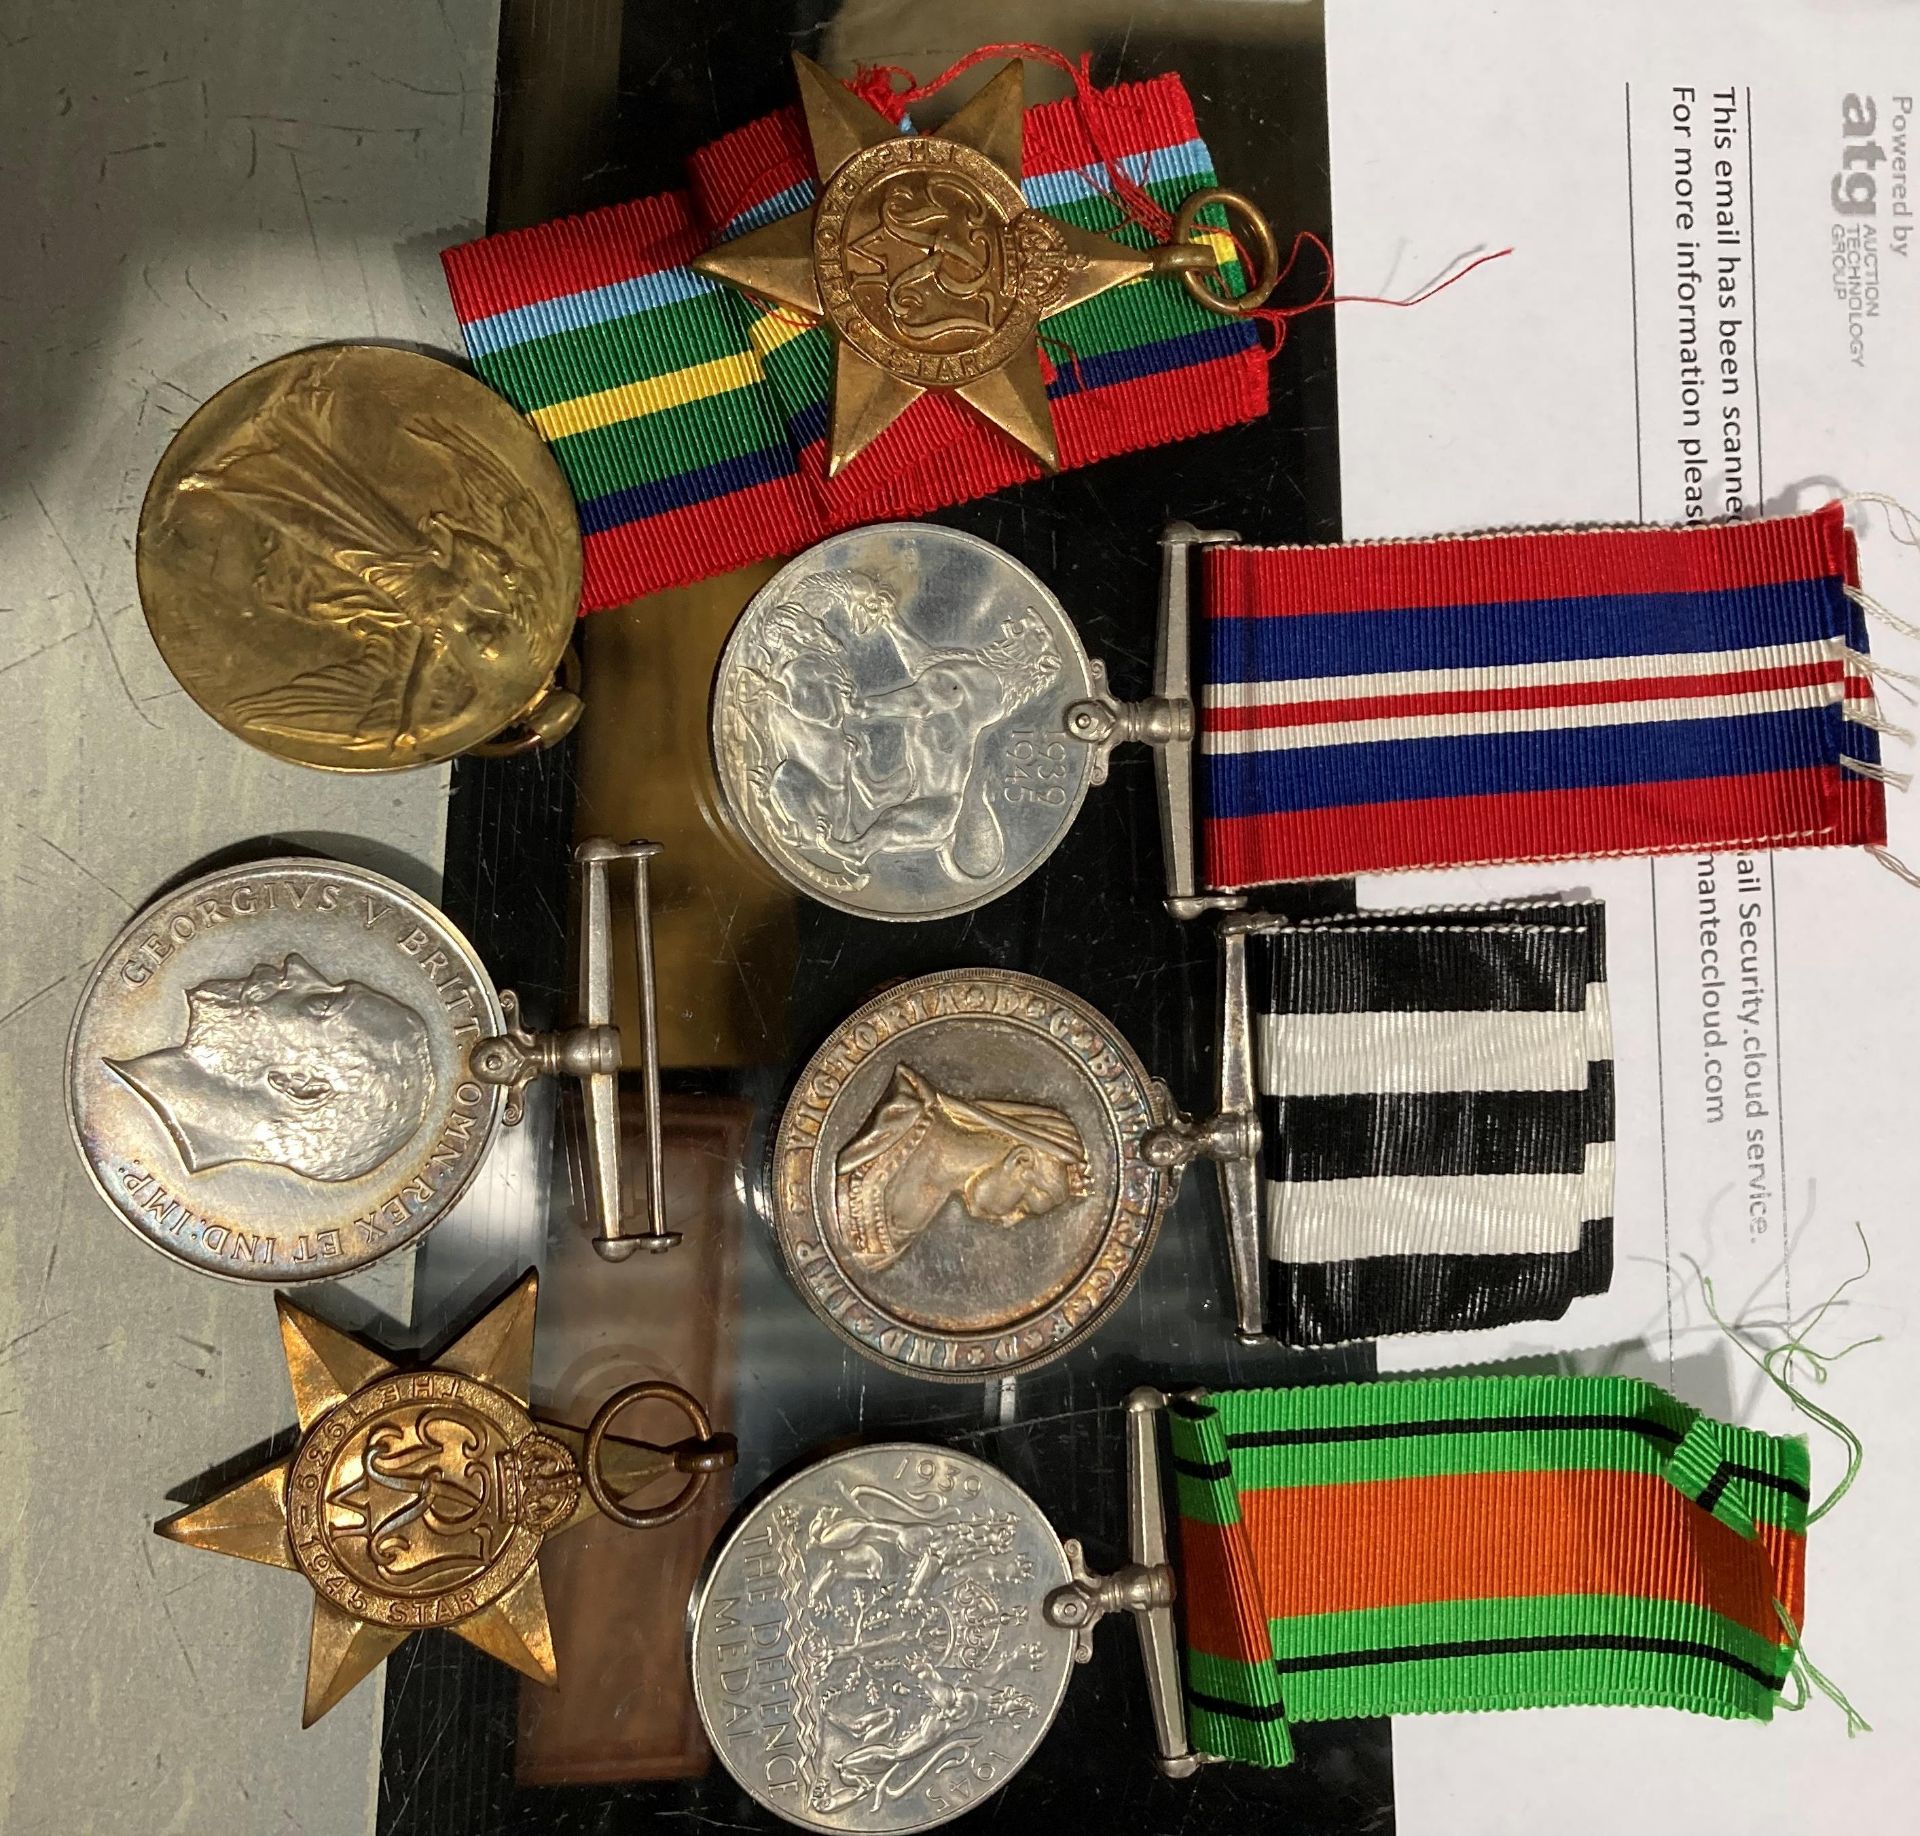 Contents to tray - two First World War medals - British World War Medal 1914-1918 and Victory Medal - Bild 8 aus 13